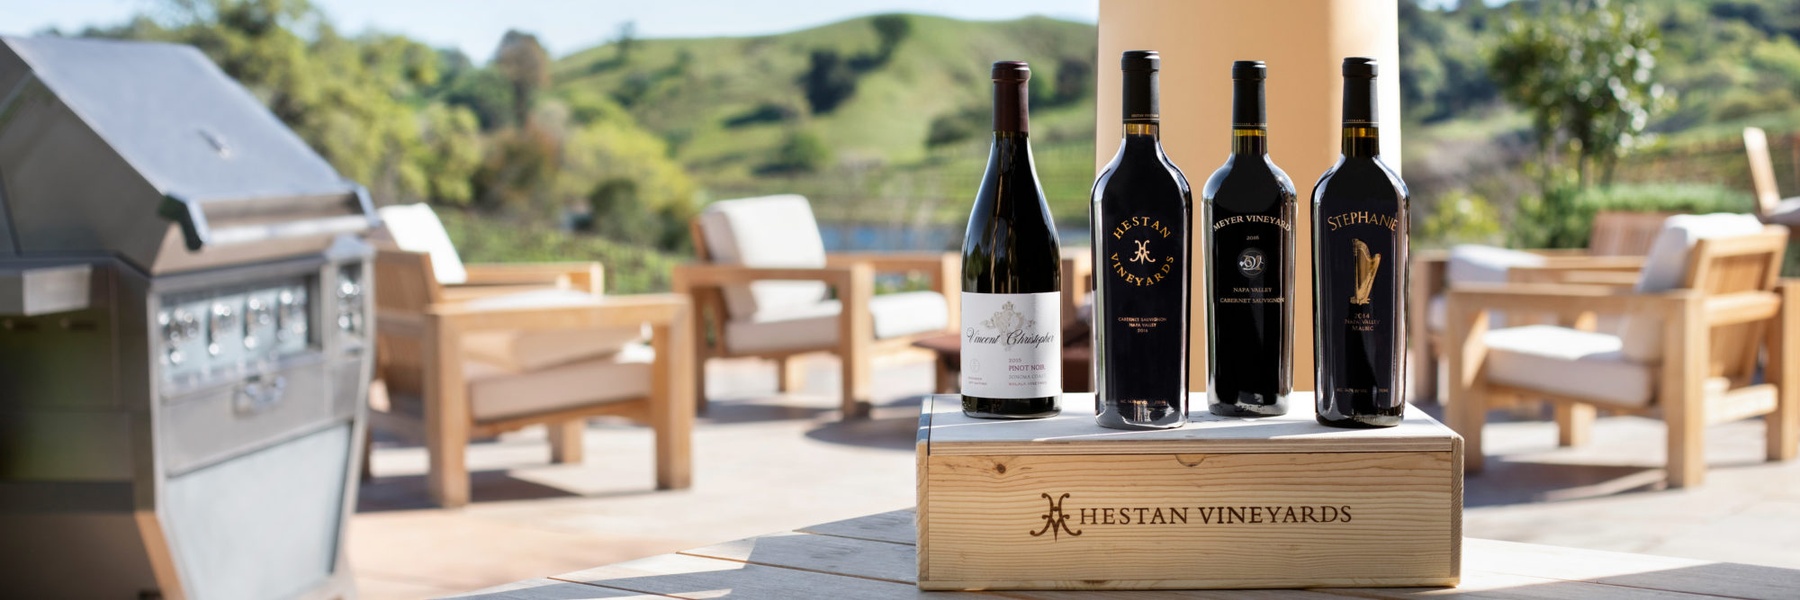 The Hestain line up on the estate patio.